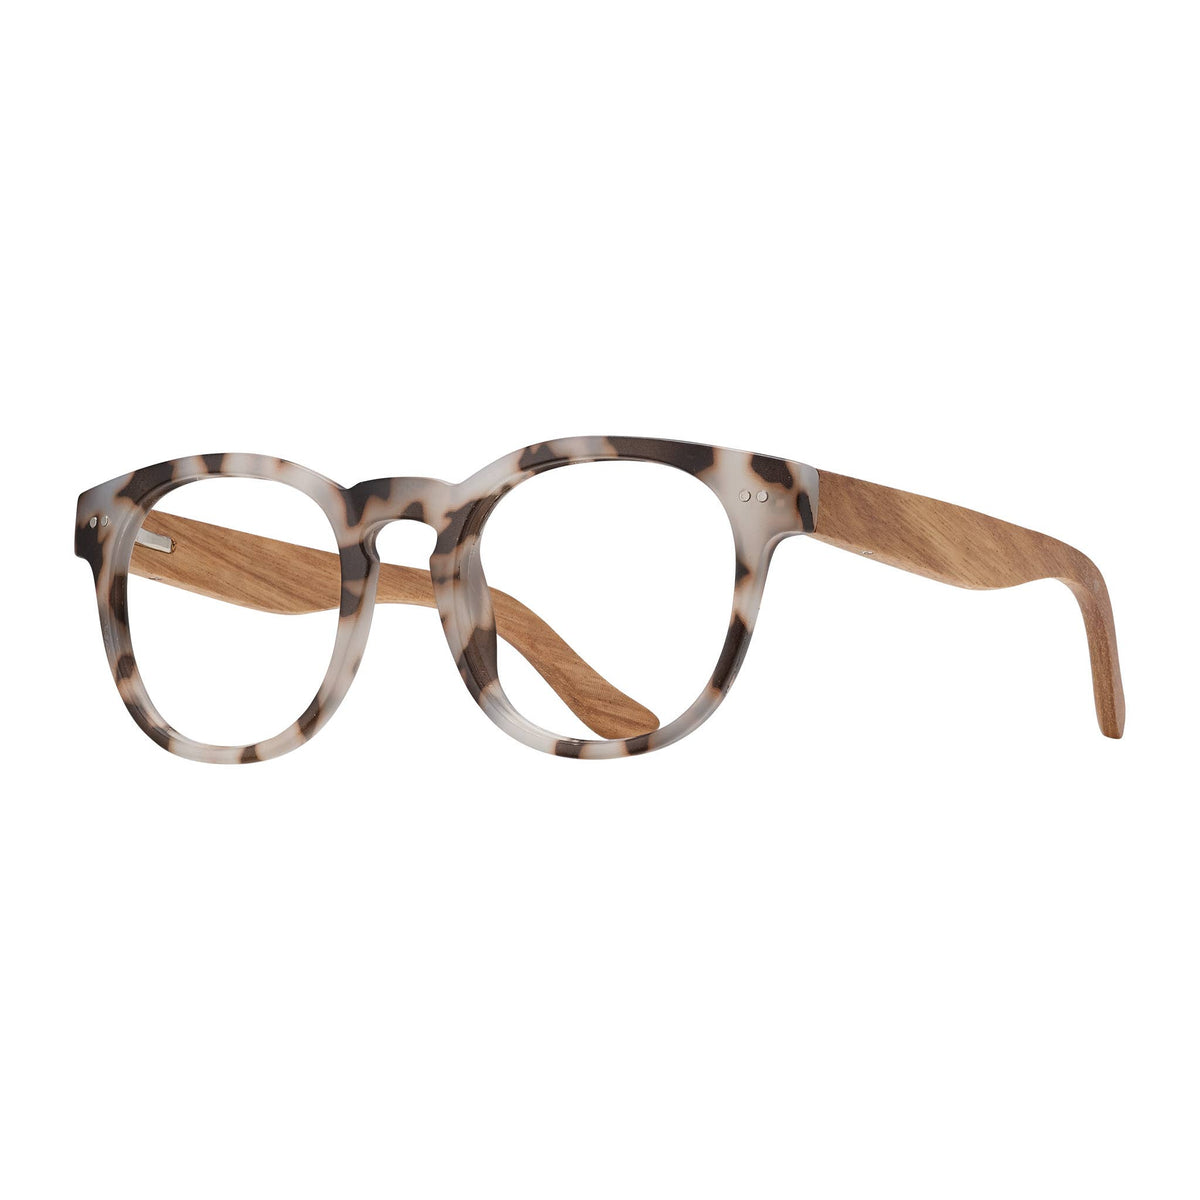 Bamboo Reading Glasses, Lightweight Eco-Friendly Readers